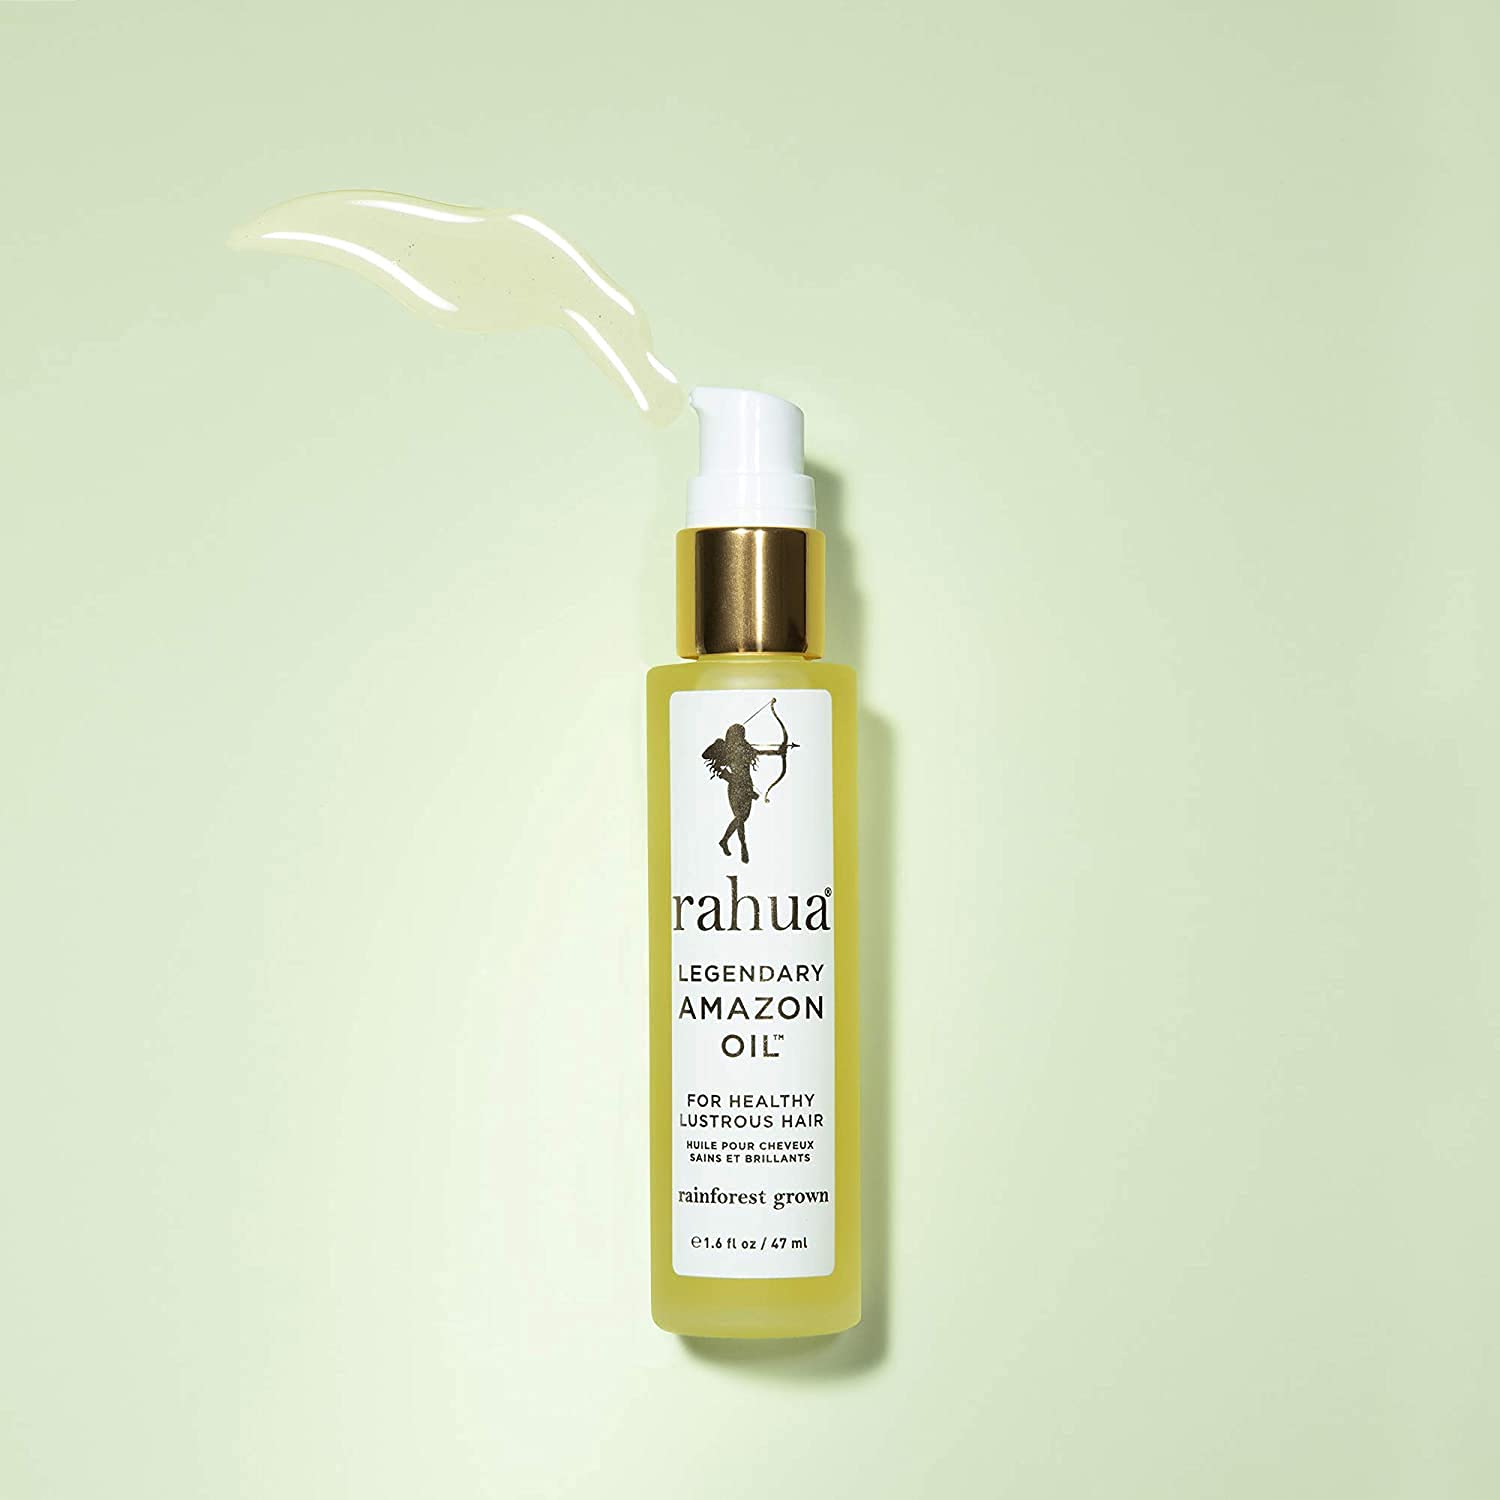 Rahua Legendary Amazon Oil , 1.6 Fl Oz, Organic Lightweight Plant Based Nourishing Shine Oil to Prevent Frizz and Flyaways split ends and Nourish and Strengthen Hair, Best for All Hair Types